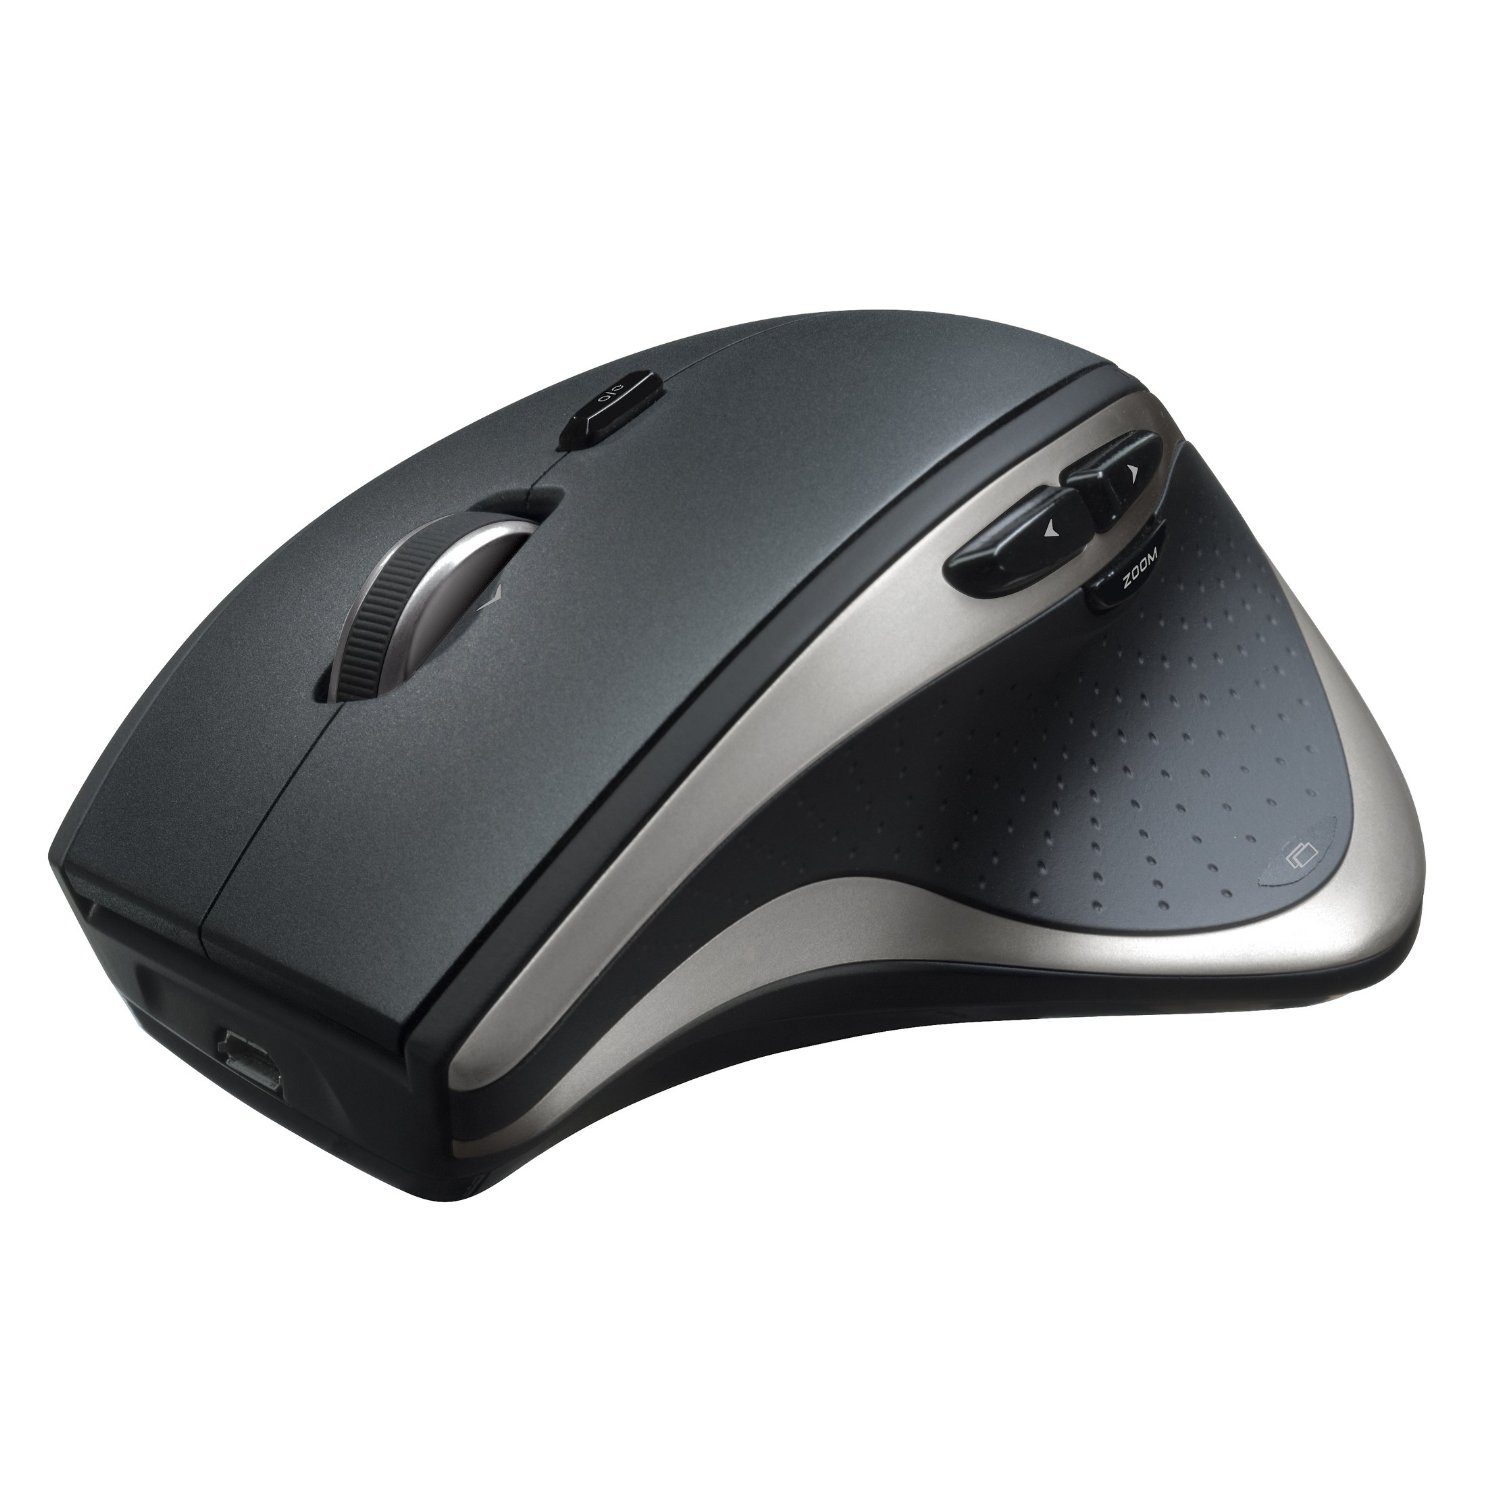 http://thetechjournal.com/wp-content/uploads/images/1111/1320199676-logitech-wireless-performance-mouse-mx-for-pc-and-mac-15.jpg